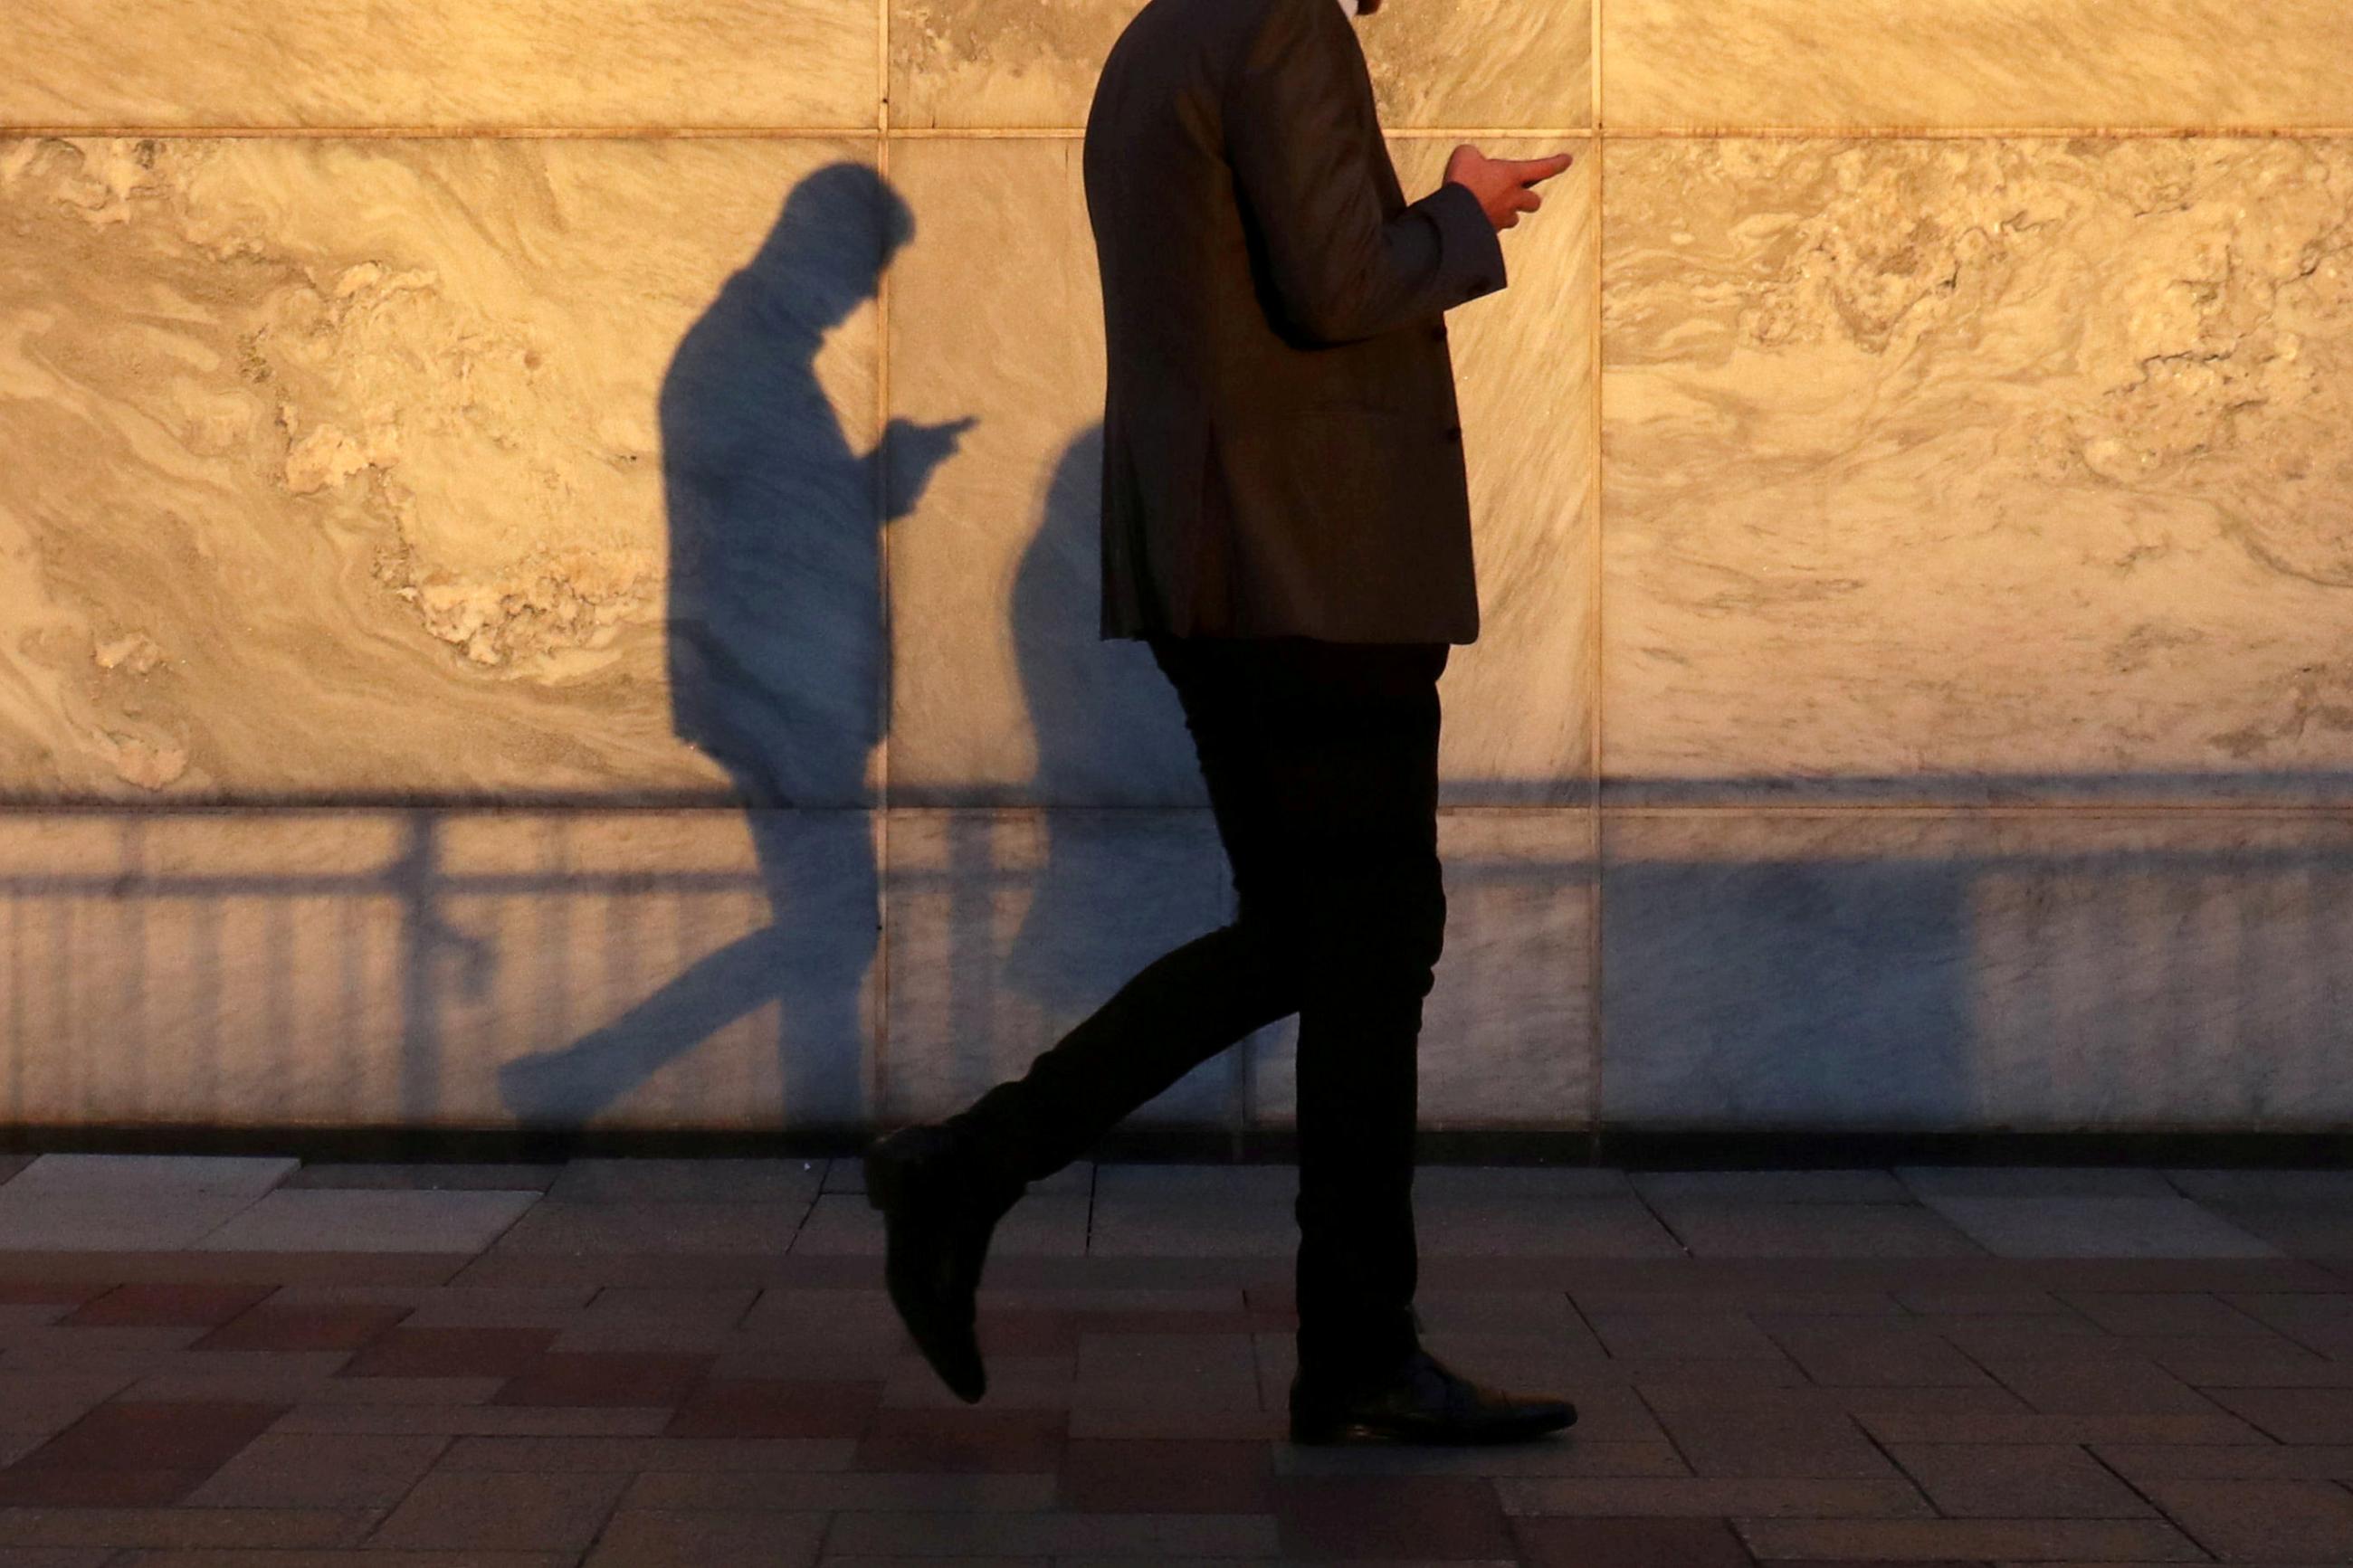 A man using a smart phone walks through London's Canary Wharf financial district in the warm yellow evening light, casting a shadow in London, United Kingdom, on September 28, 2018.